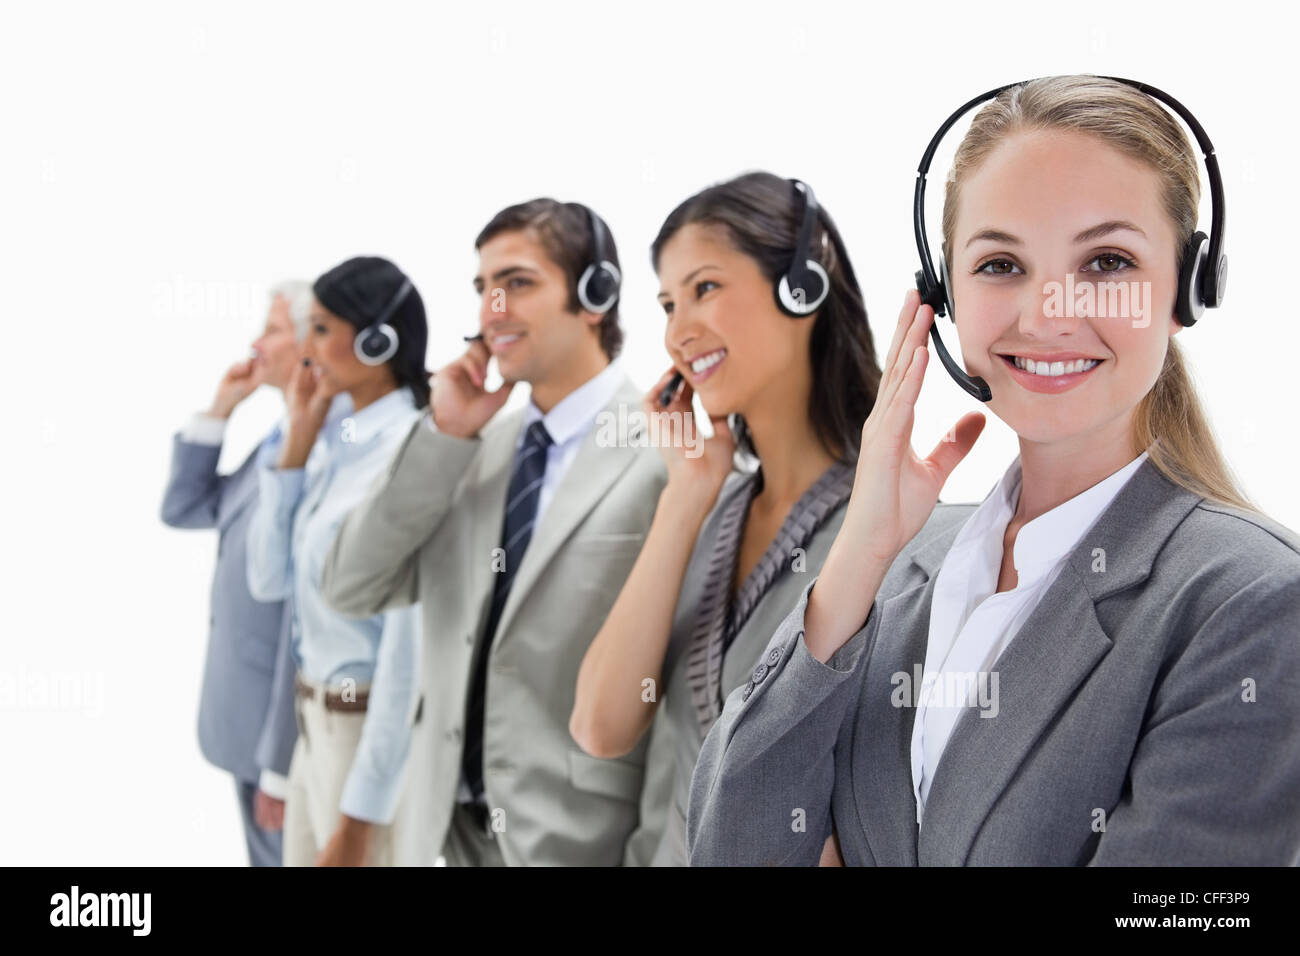 Smiling professionals listening with headsets Stock Photo